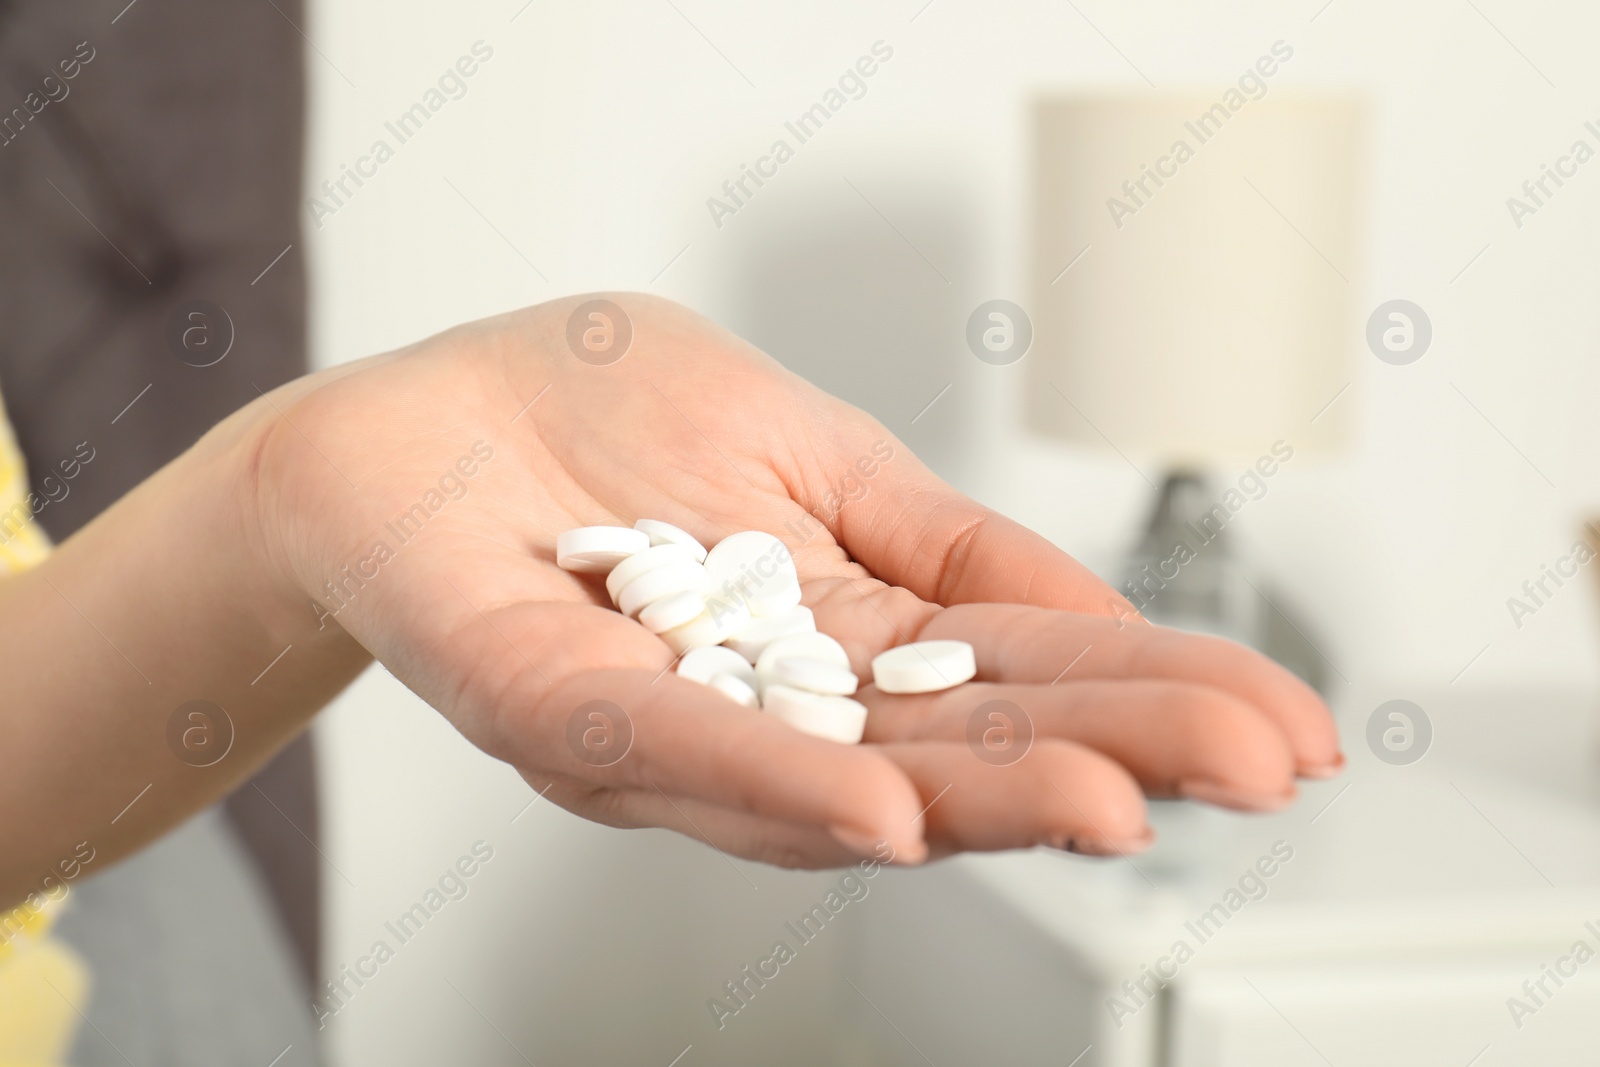 Photo of Woman holding many pills in hand indoors, closeup view